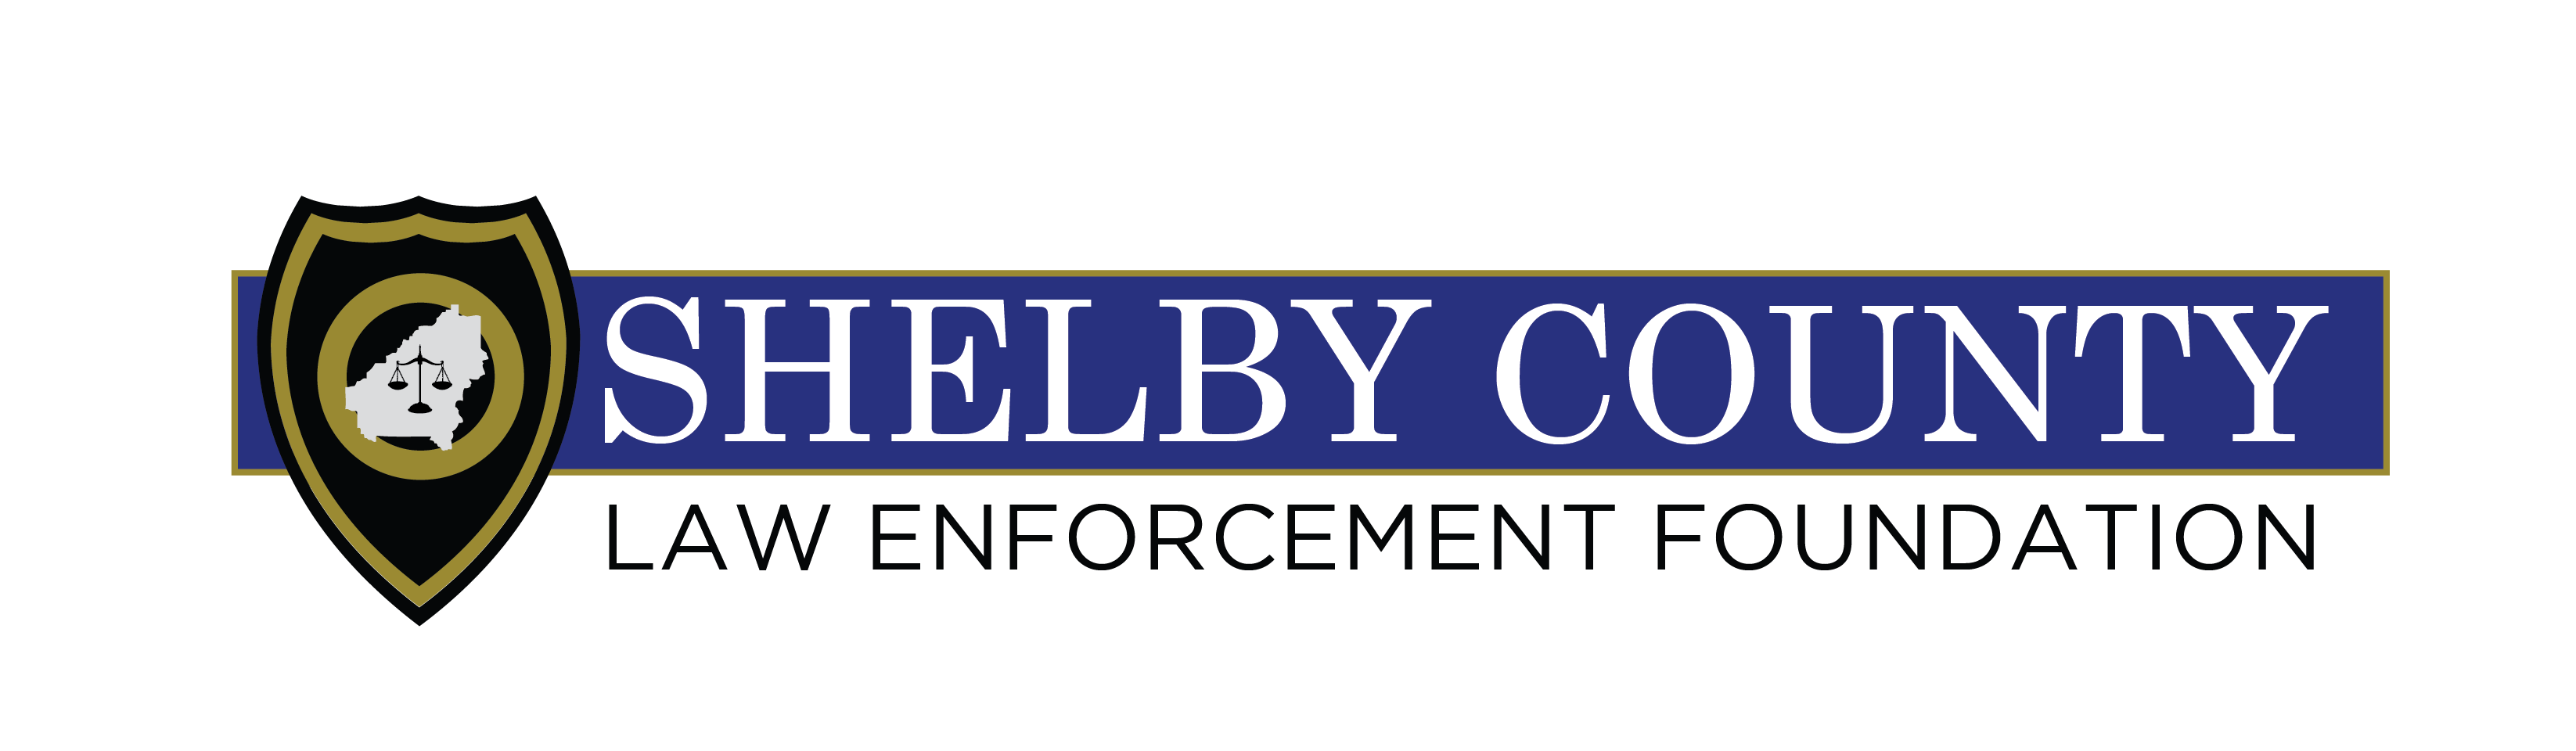 Shelby County Law Enforcement Foundation